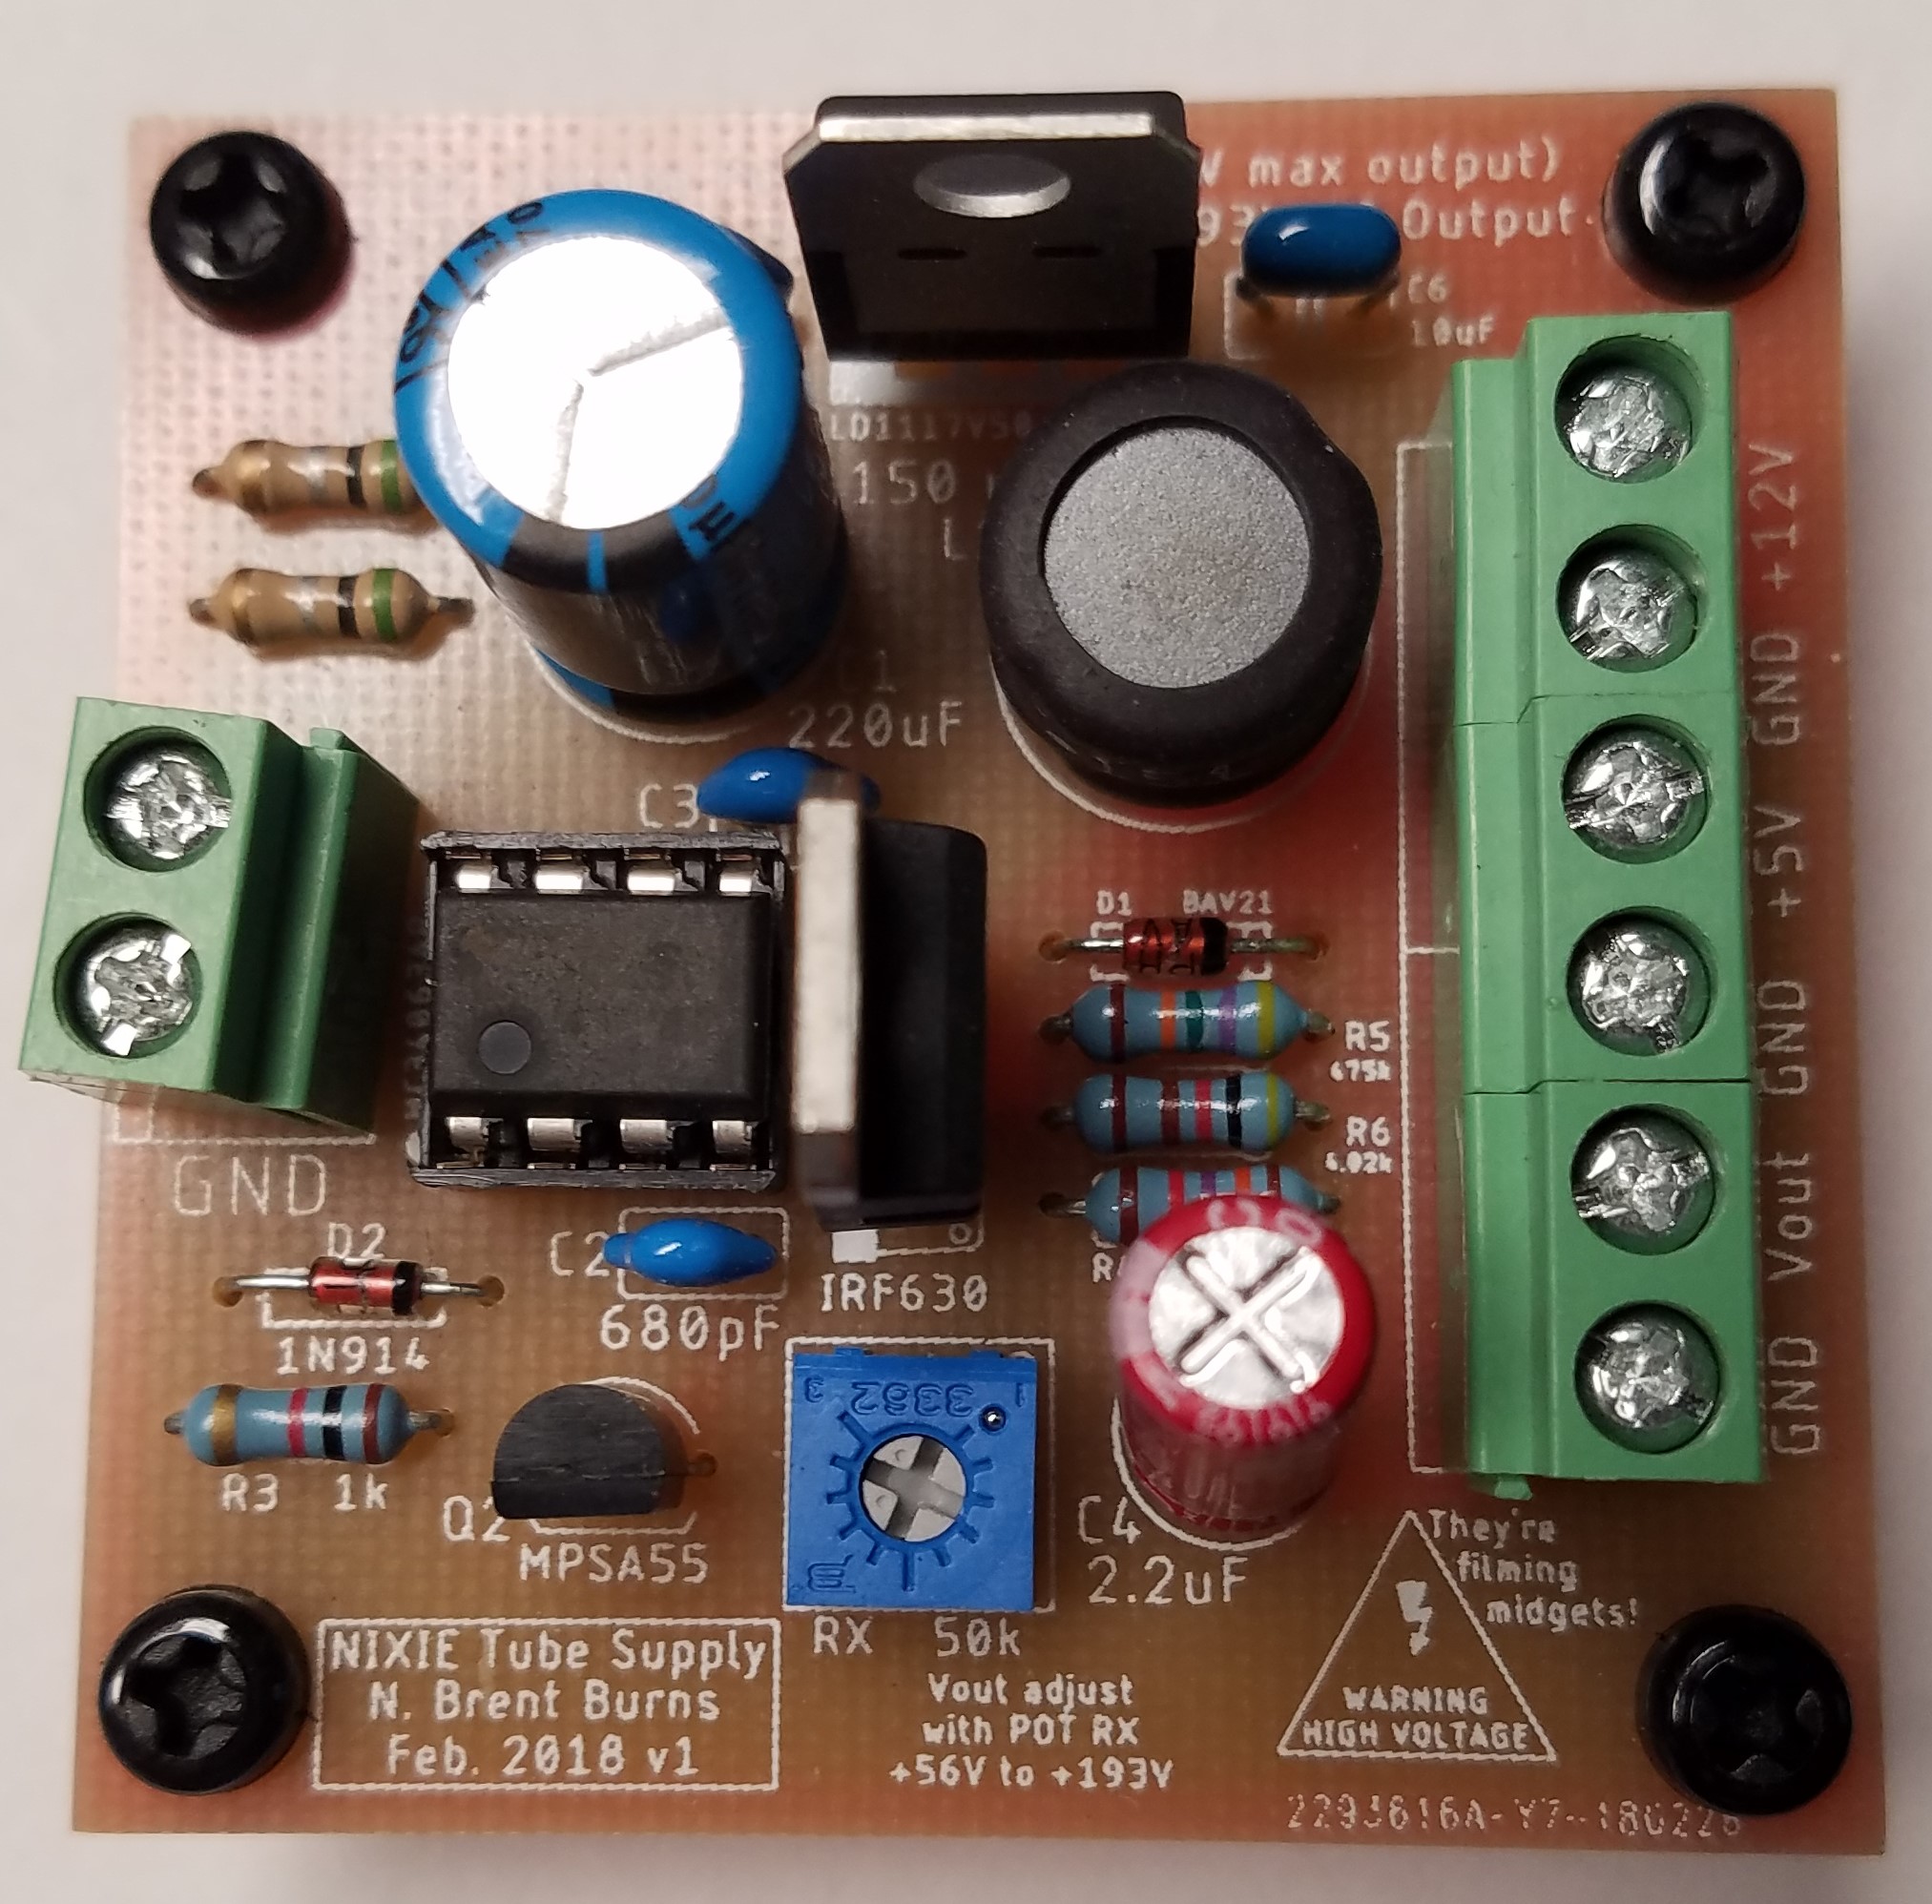 High Voltage Power Supply Circuit for Nixie Tubes